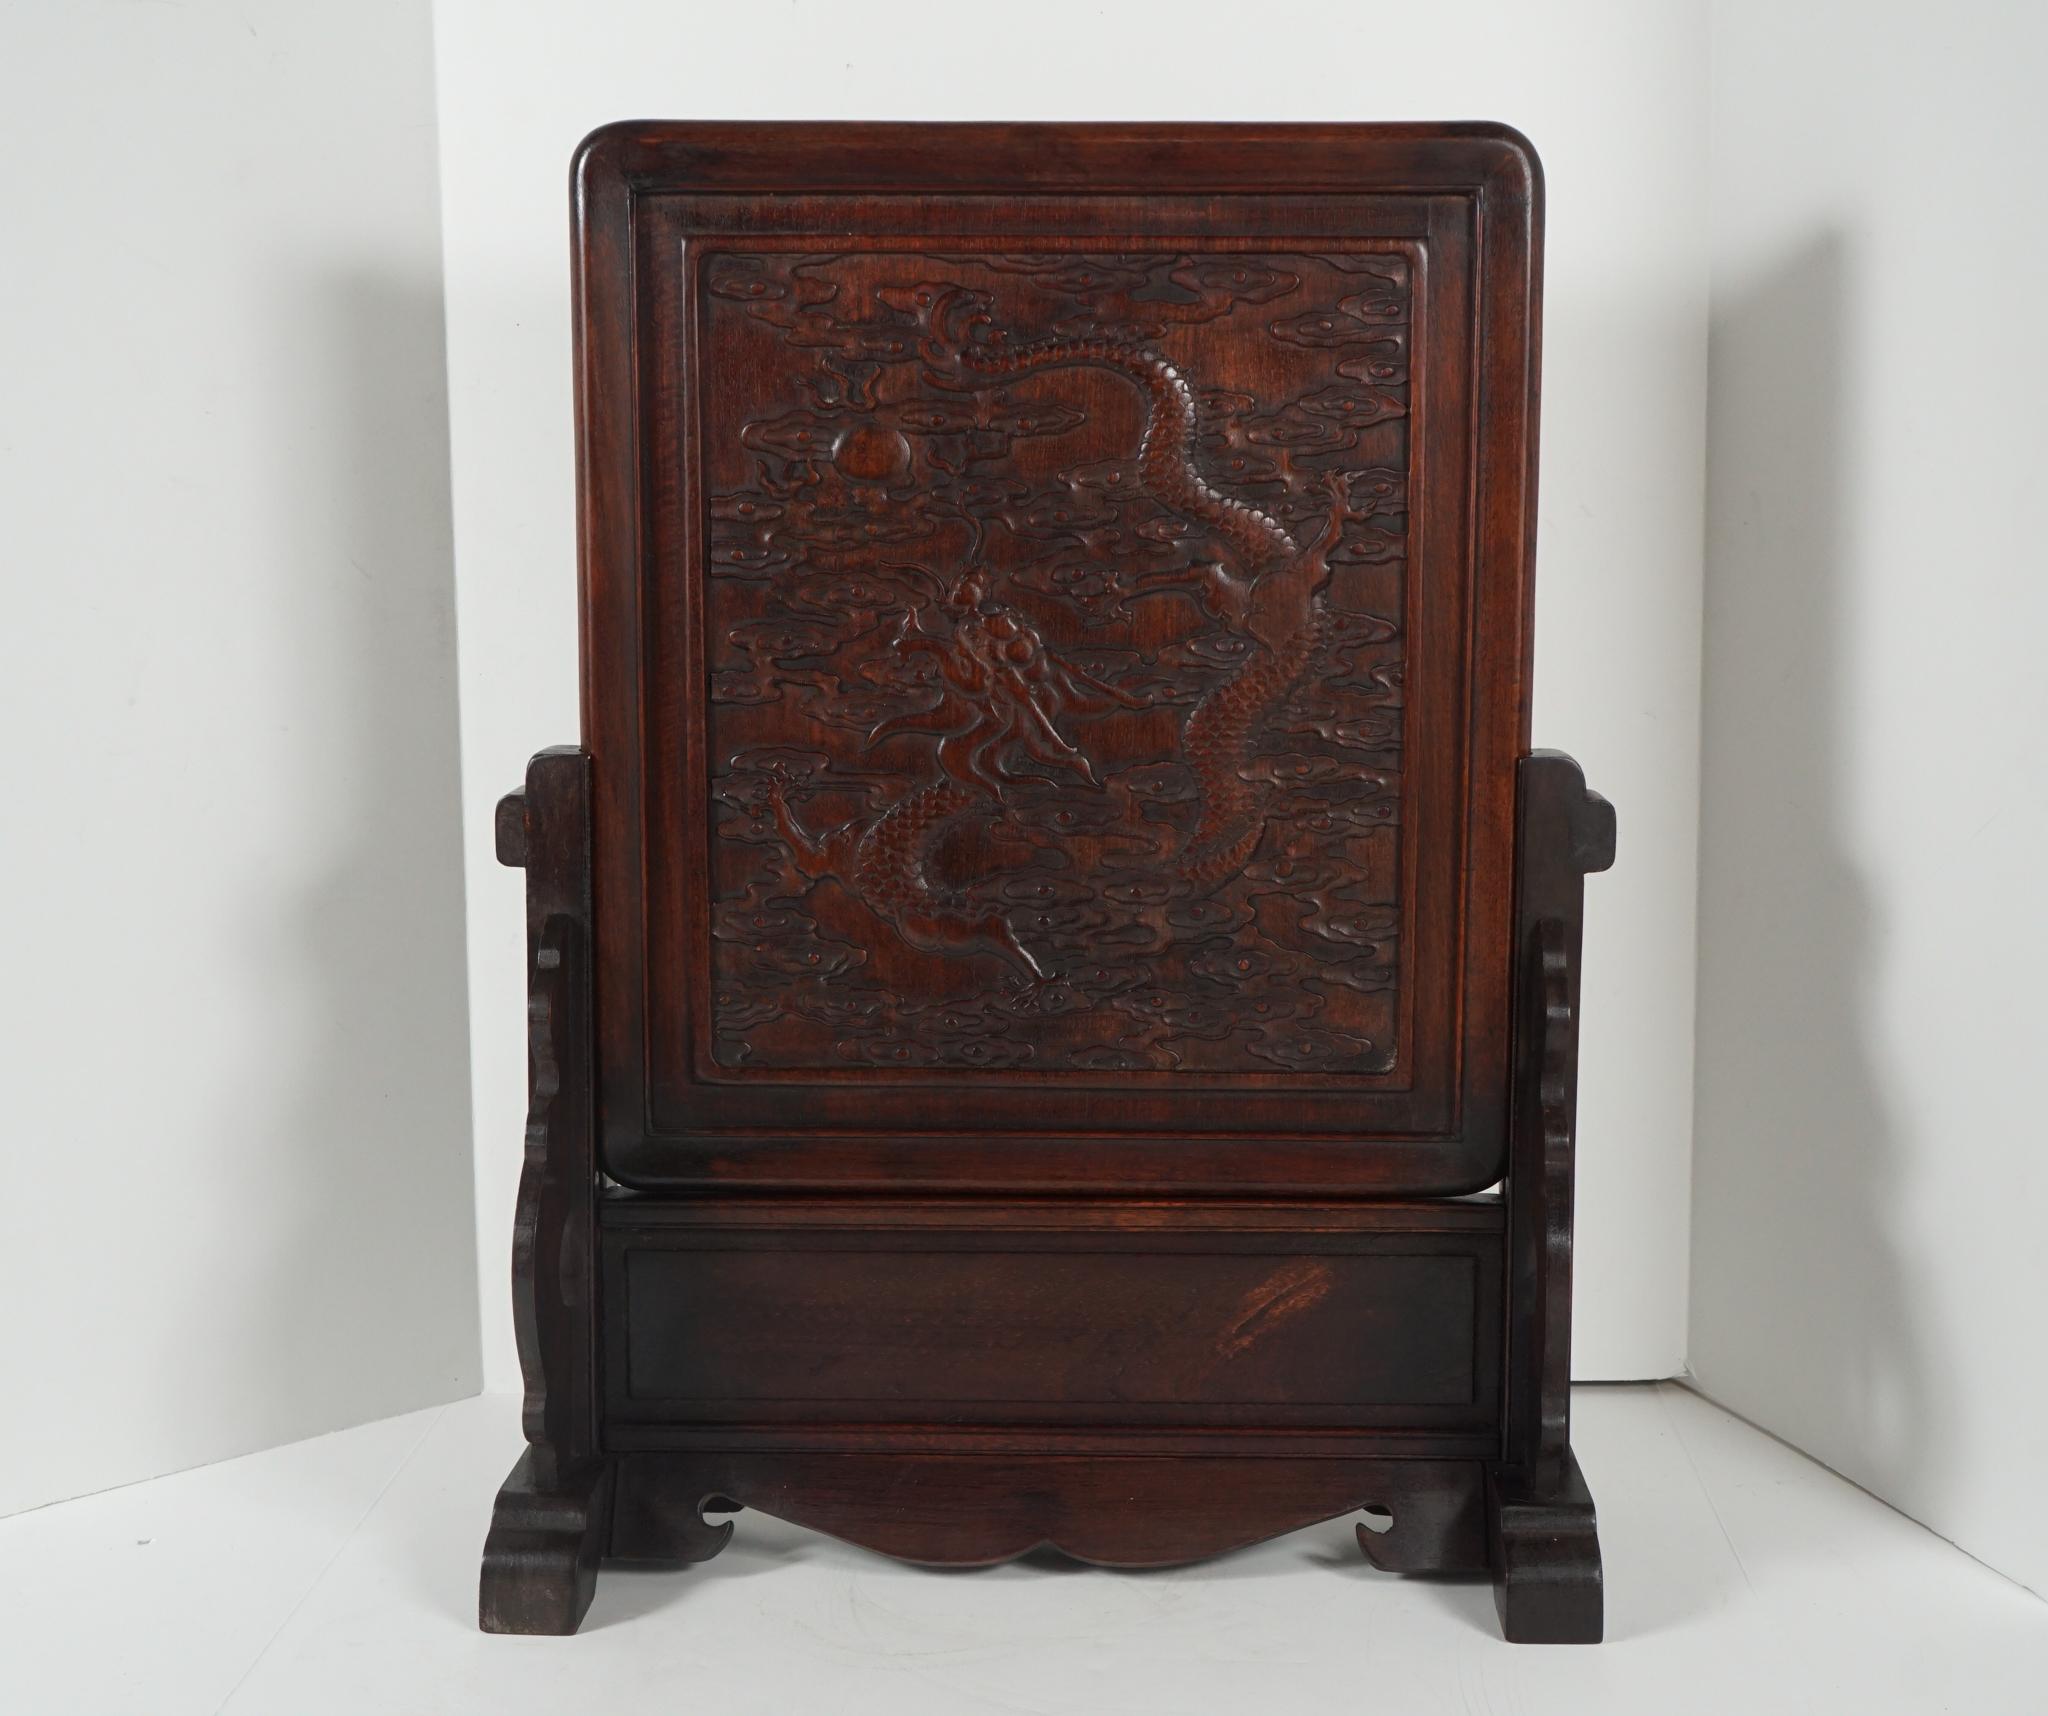 This nice large carved rosewood table screen was created in China, circa 1870. Its carved details depict a dragon flying through celestial clouds in pursuit of a flaming pearl. The workmanship is both intense and subtle with many elements in low